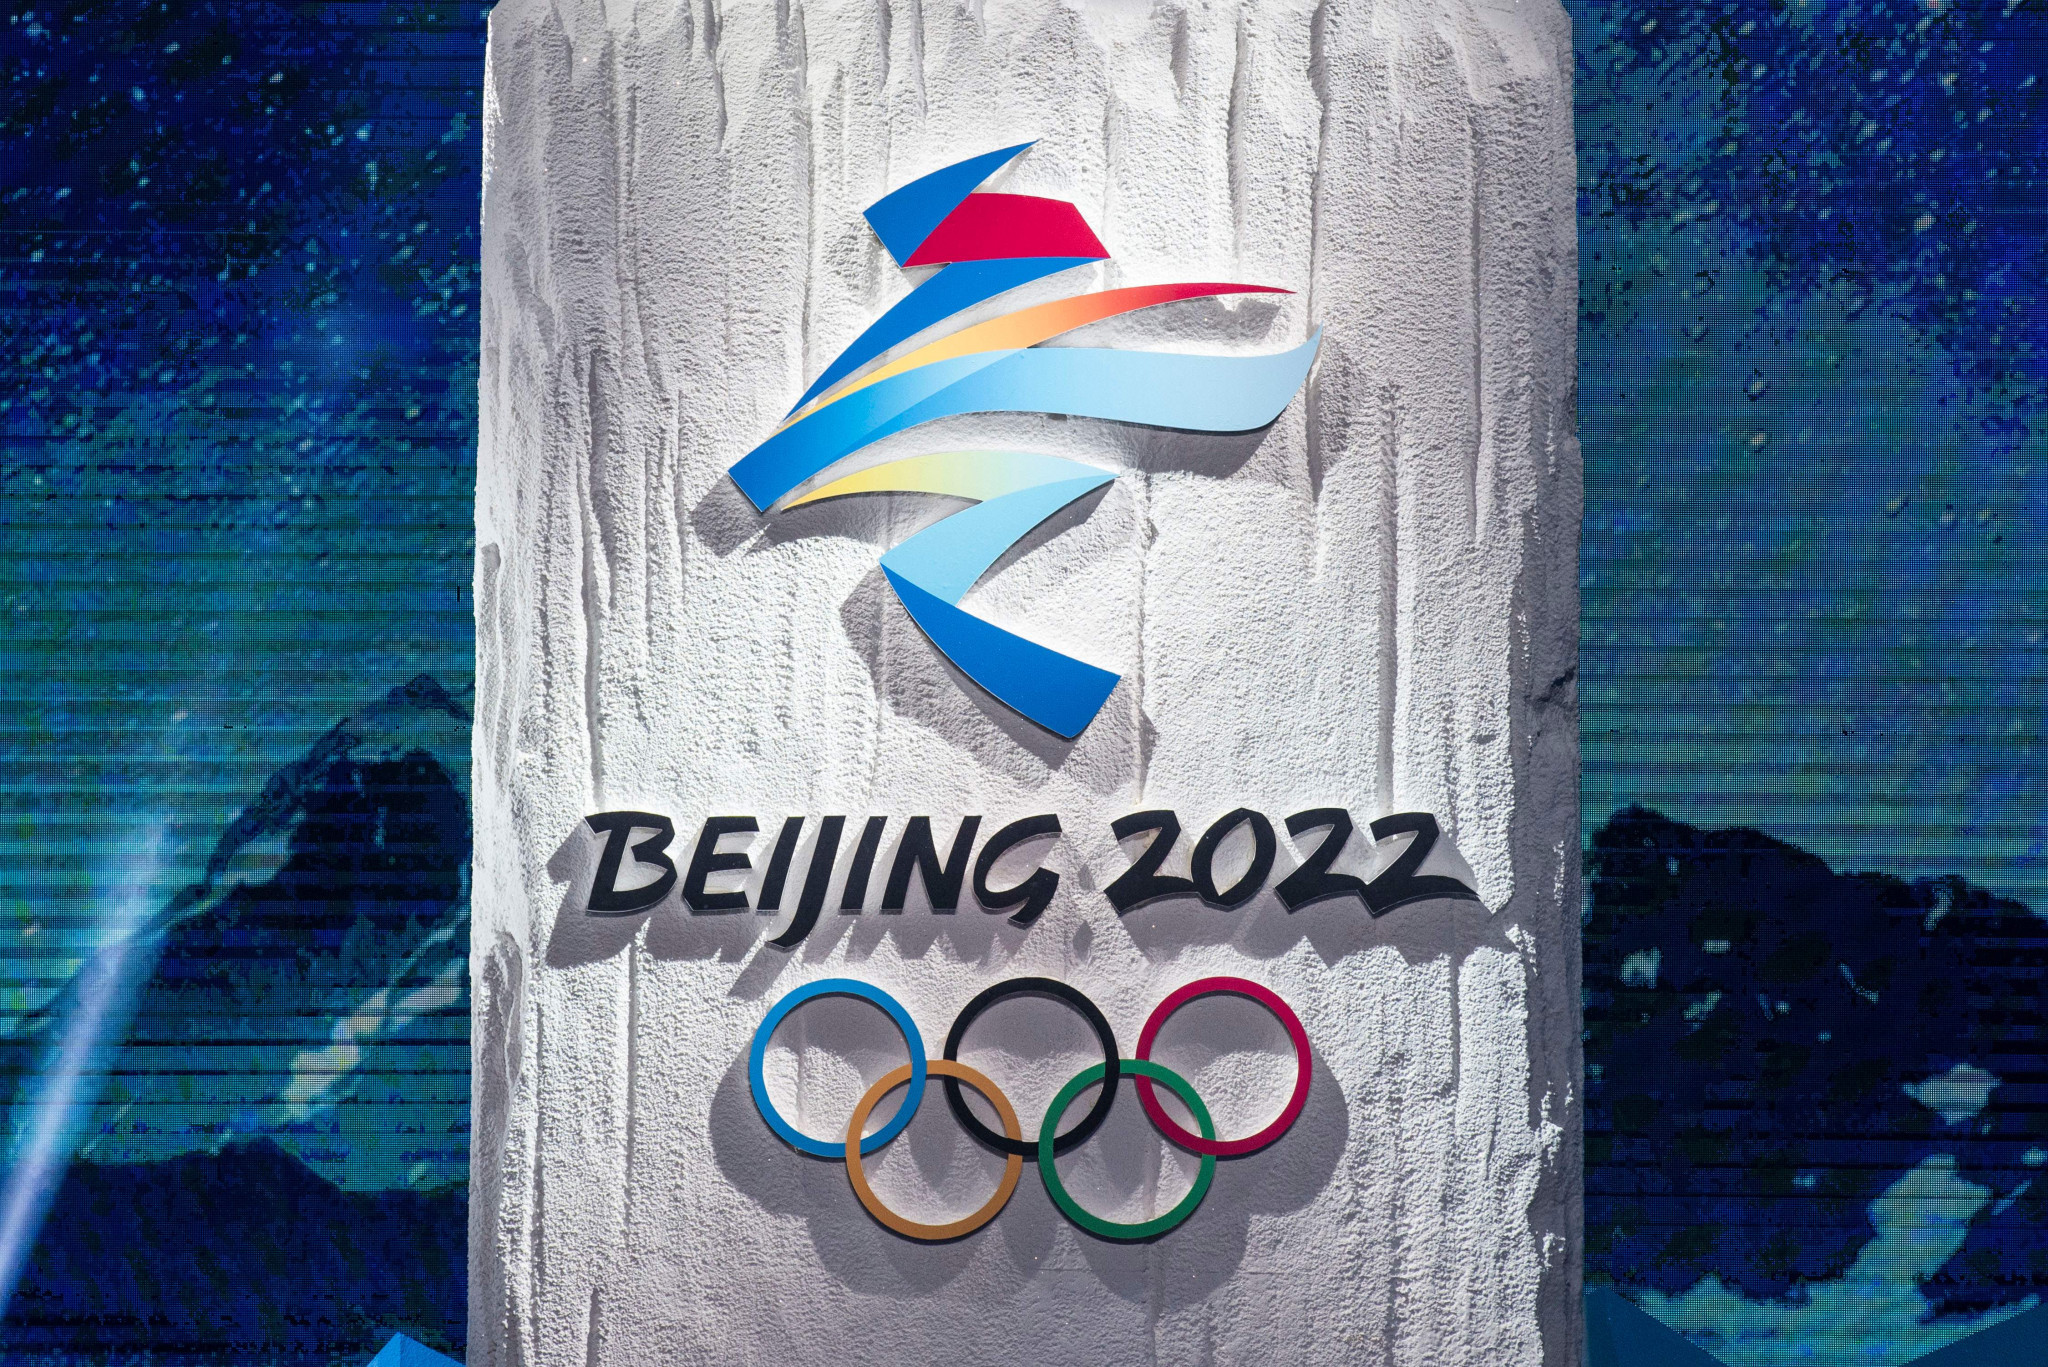 Beijing 2022 attempt to play down environmental problems surrounding water supplies